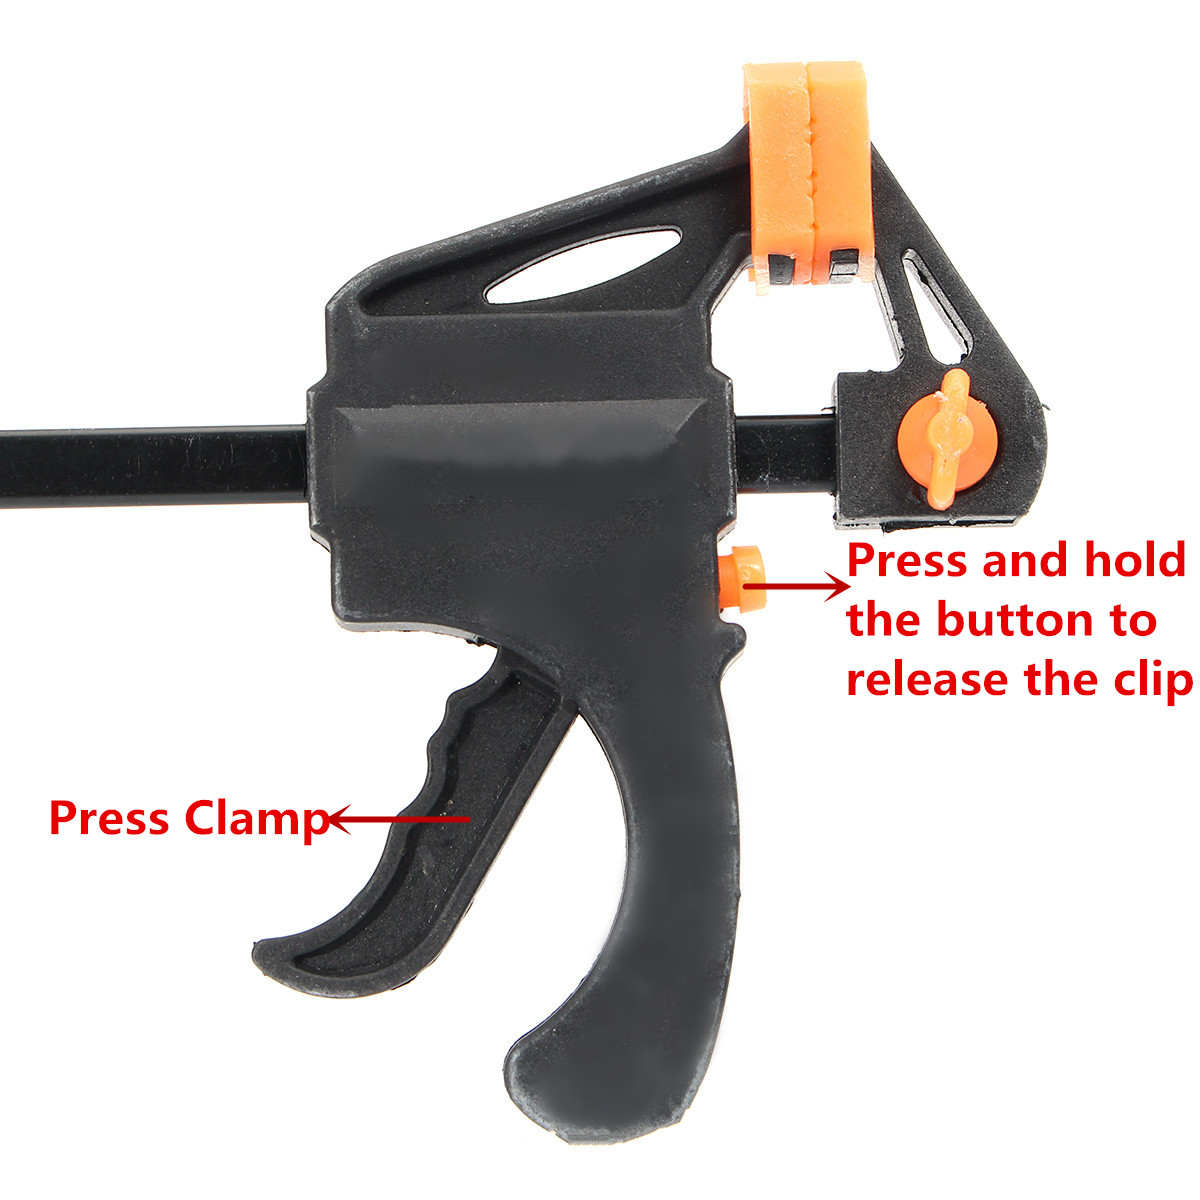 6/8/10/12 Inch Wood Working Bar Release Squeeze Hand Tool F Clamp Grip Ratchet More-nimble Version Hardened Steel Bar no Rust